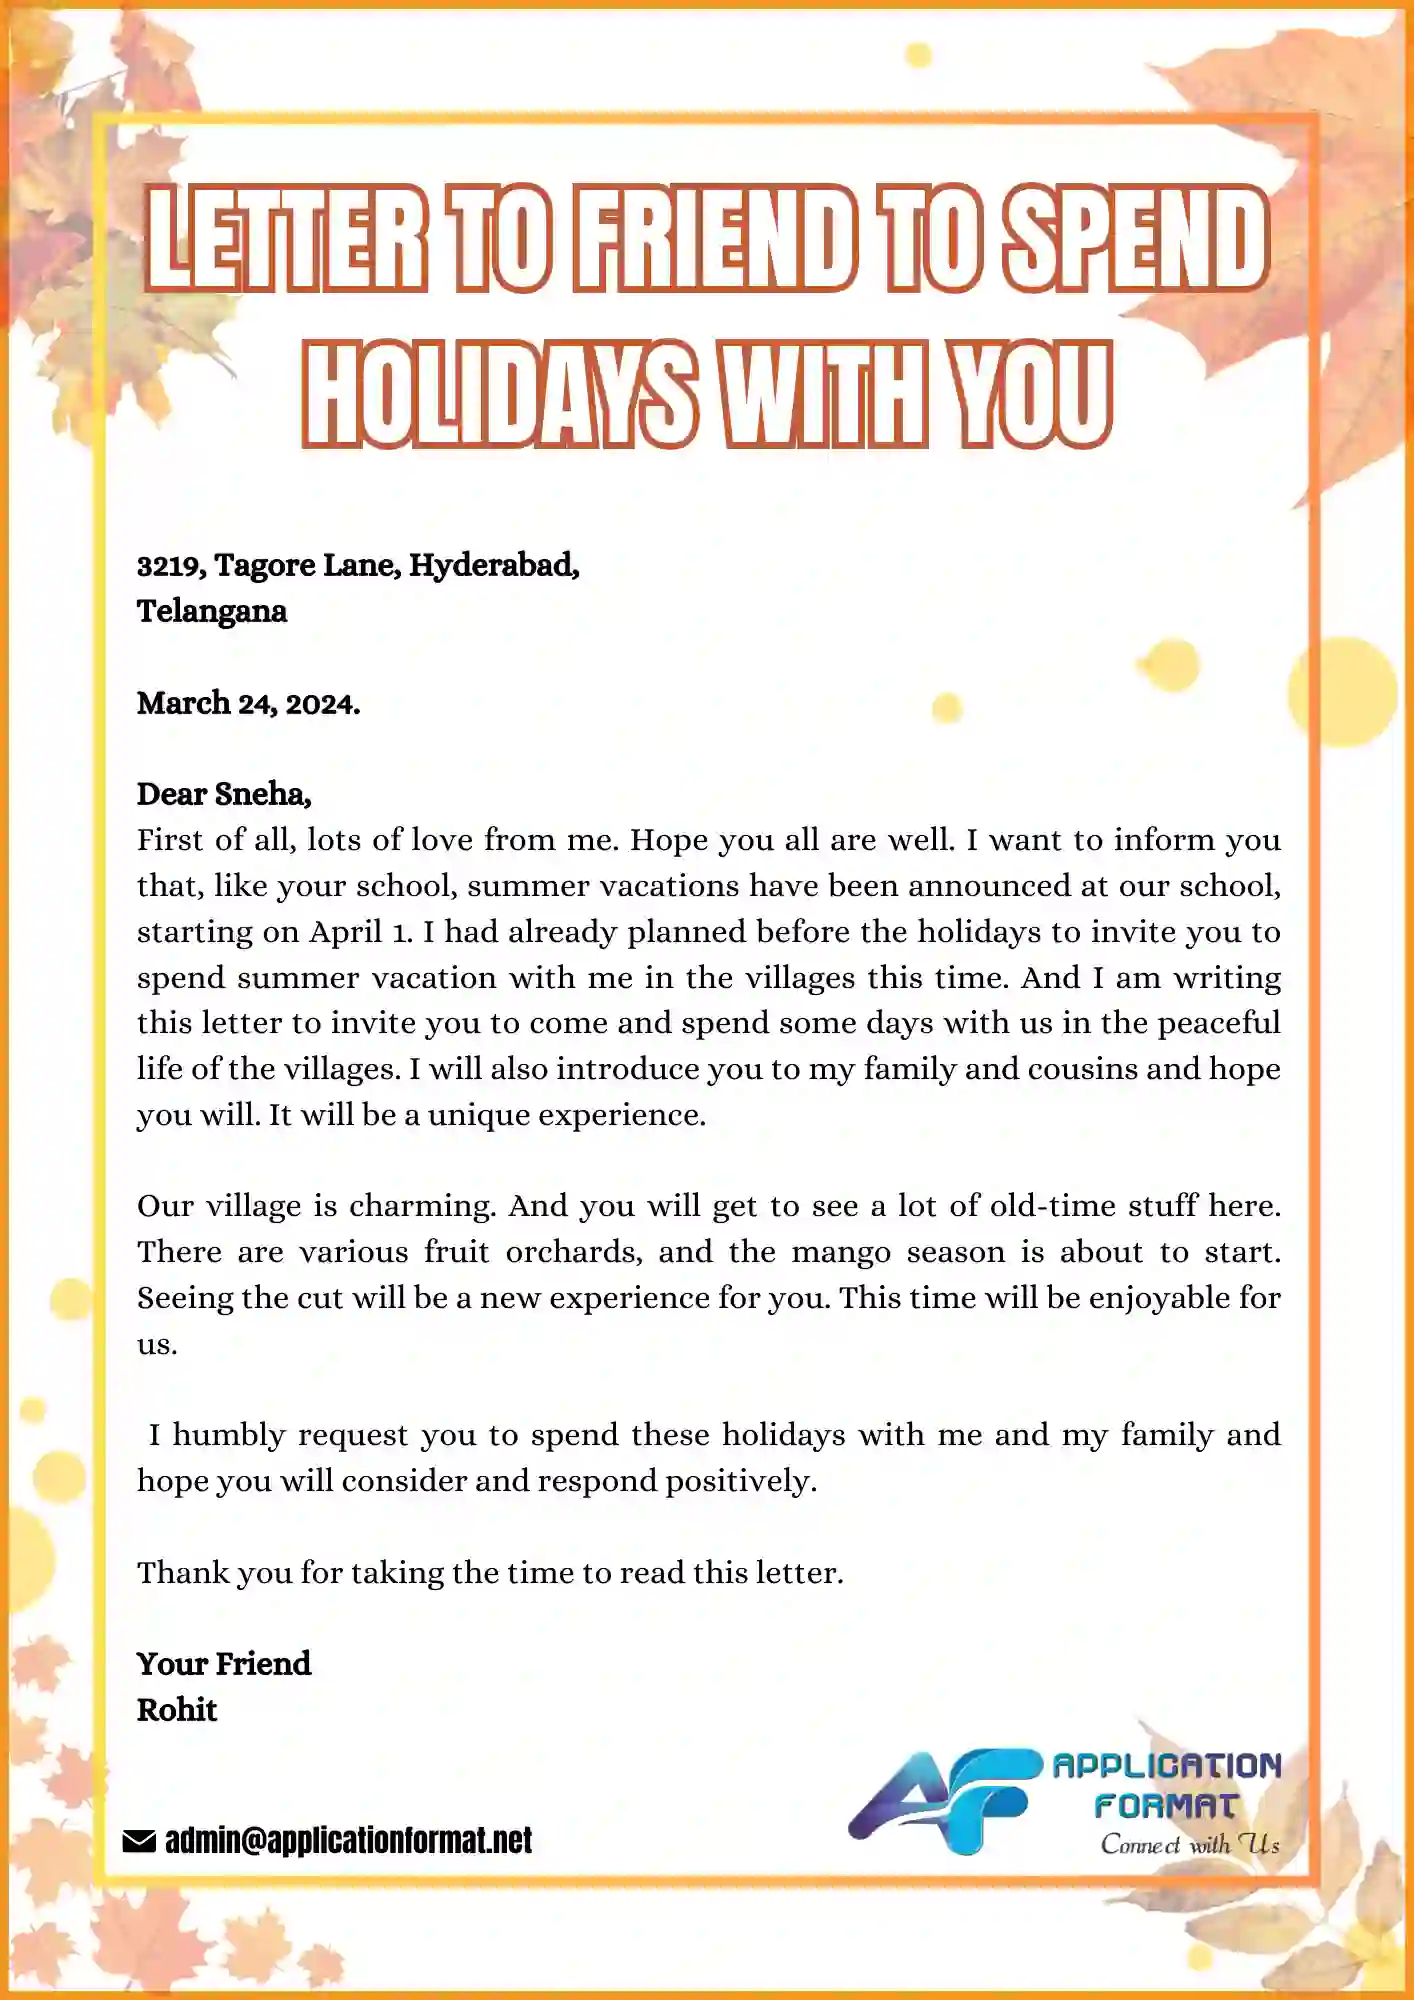 Letter to Friend to spend Holidays with you